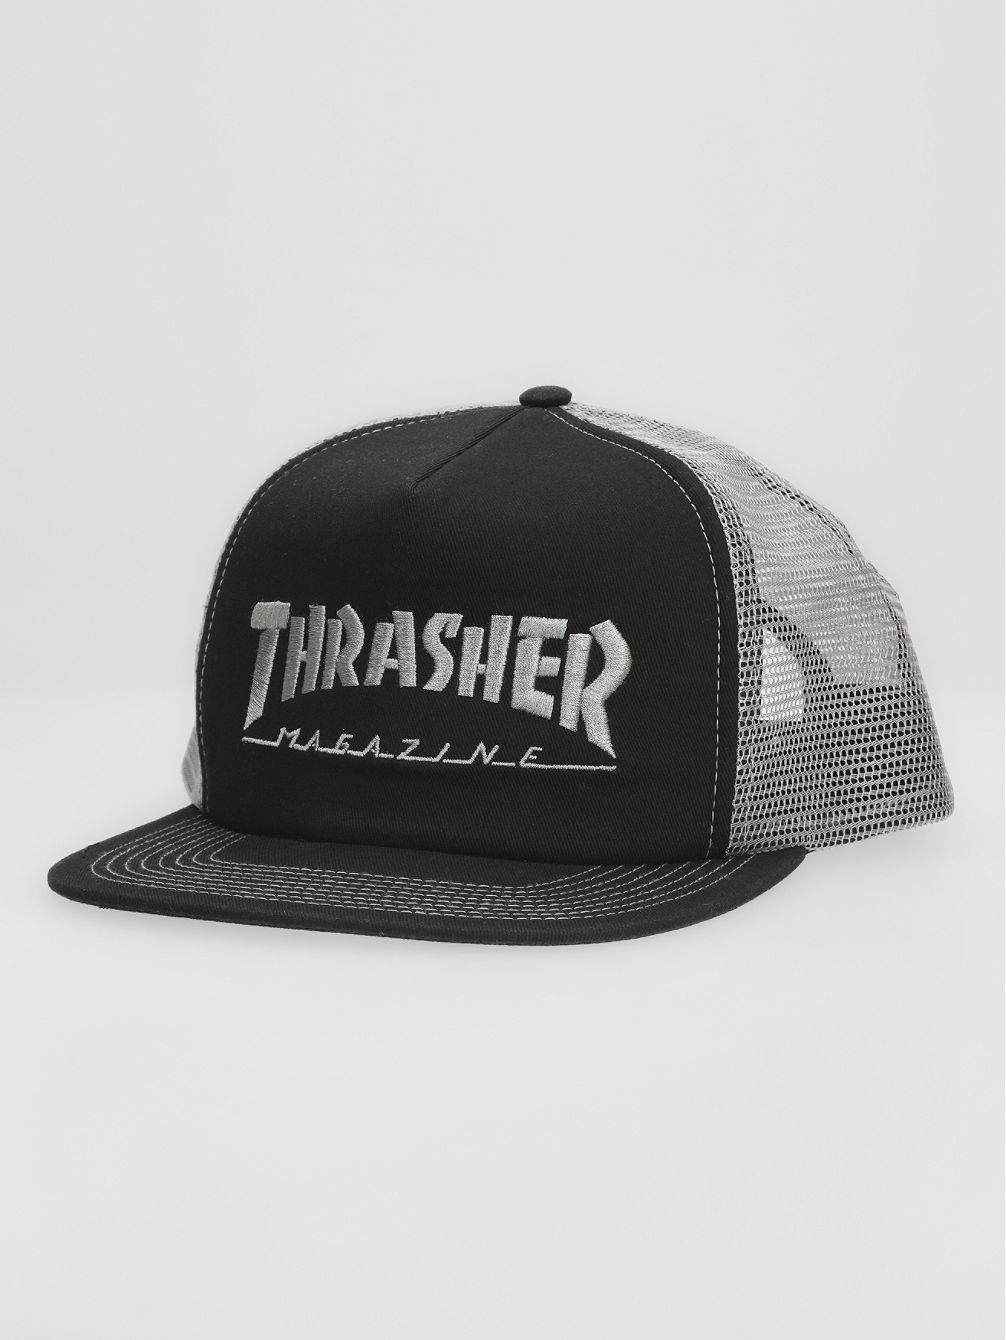 Logo Embroidedred Mesh Cappellino